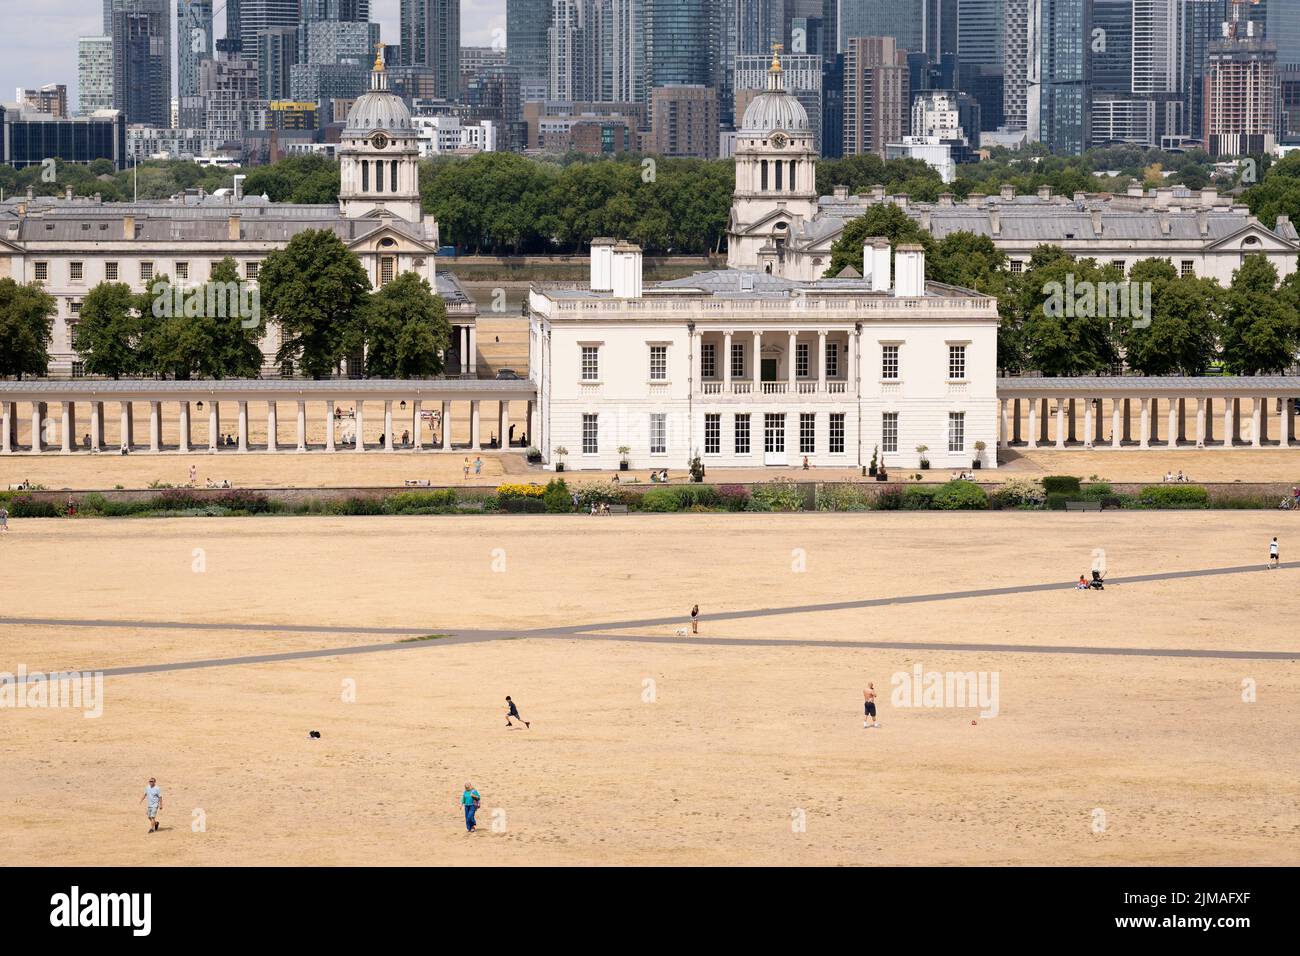 Overlooked by the former royal residence, Queen's House, park users walk through a parched grass landscape in Greenwich Park as the UK's heatwave and drought continues into August with little rain having fallen in London and south-east England, on 4th August 2022, in London, England. Queen's House is a former royal residence built between 1616 and 1635 near Greenwich Palace. Stock Photo